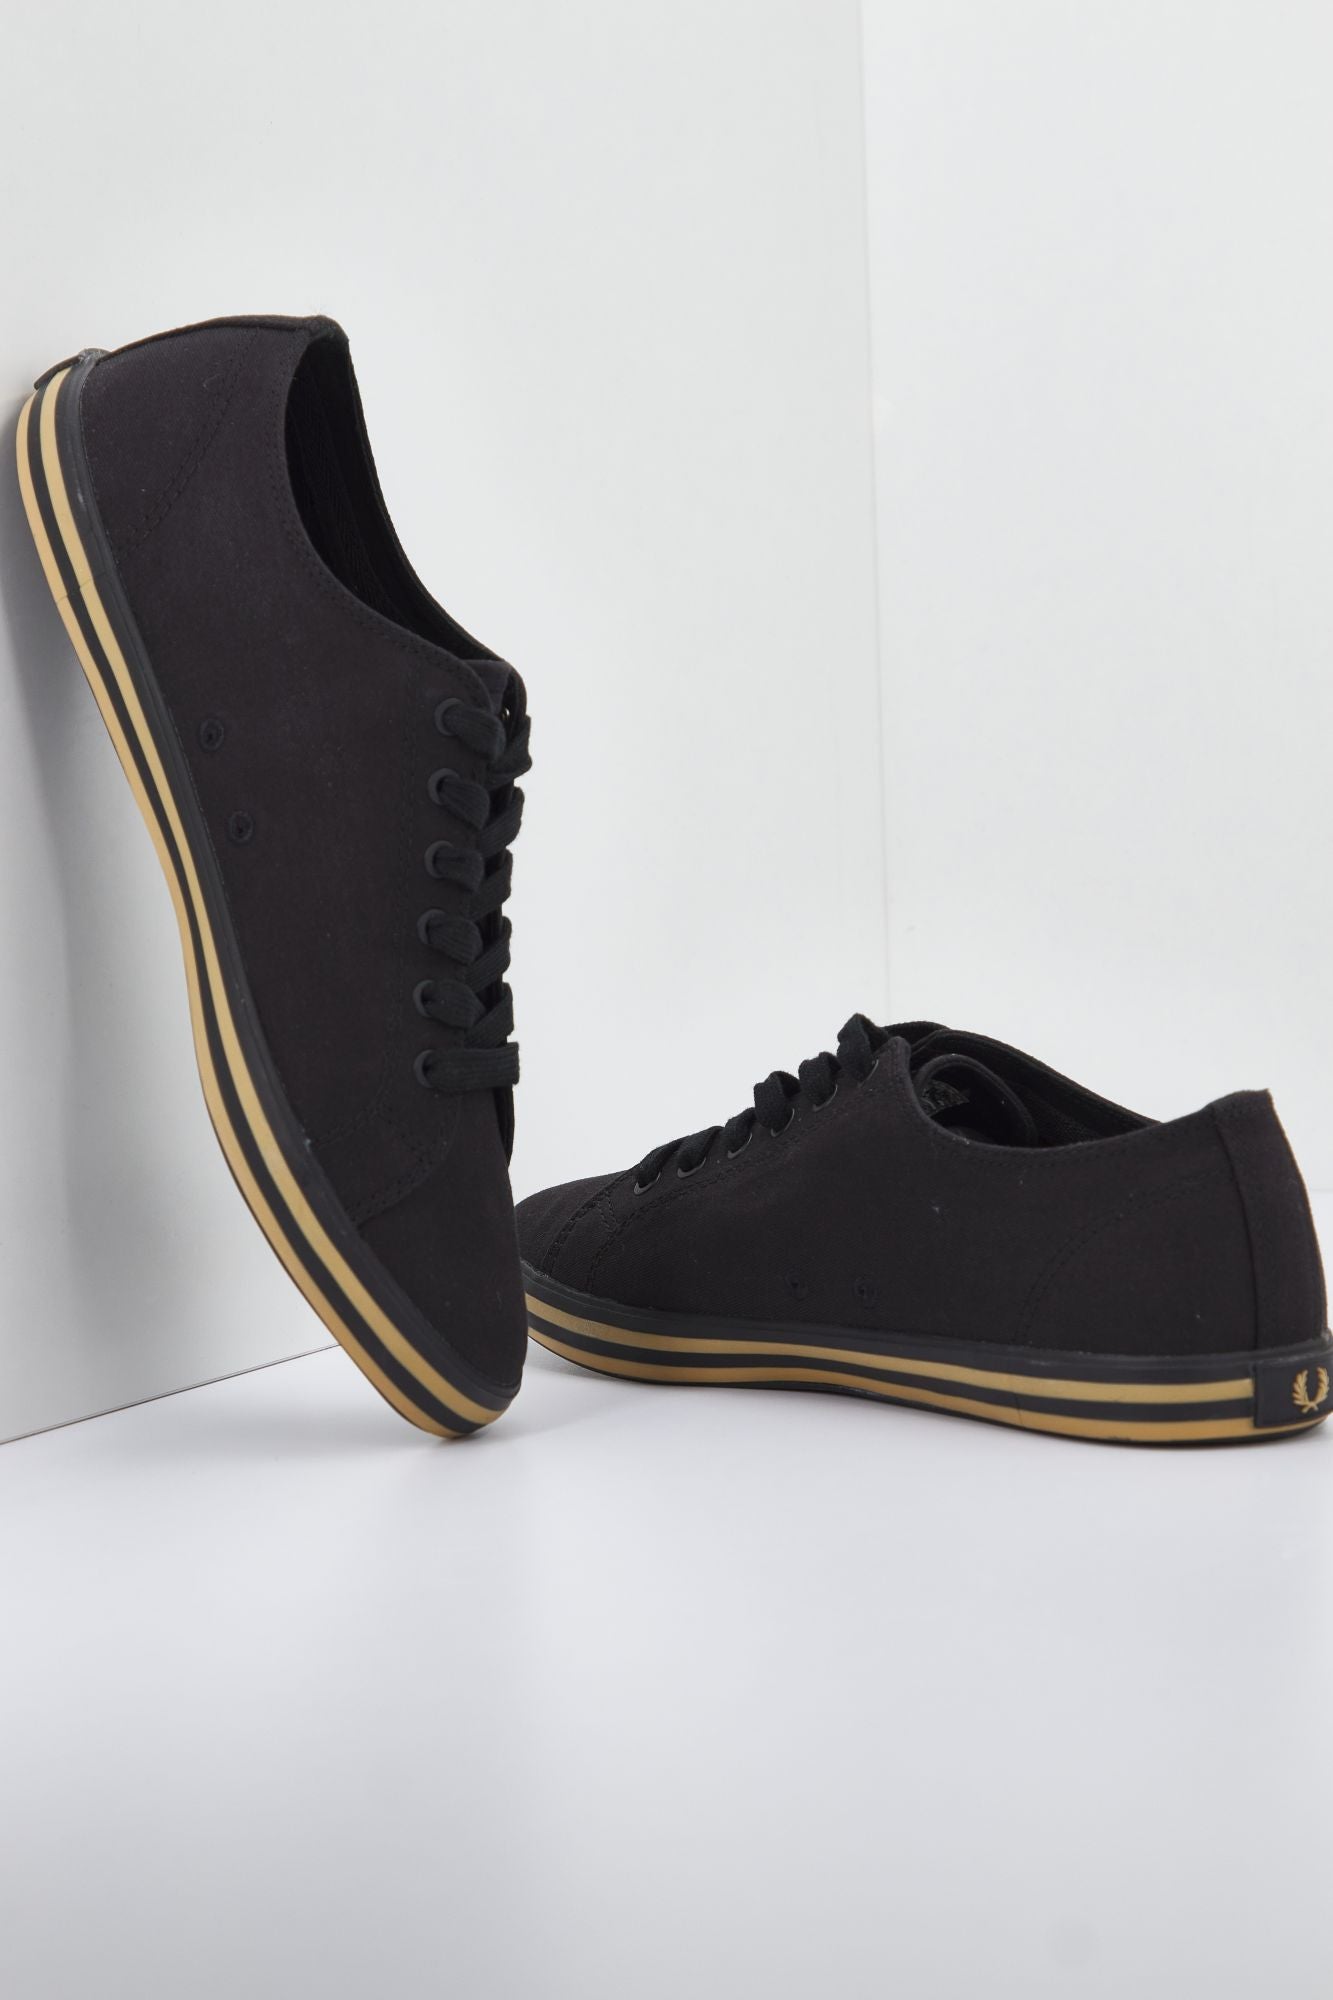 FRED PERRY KINGSTON TWILL en color NEGRO (2)